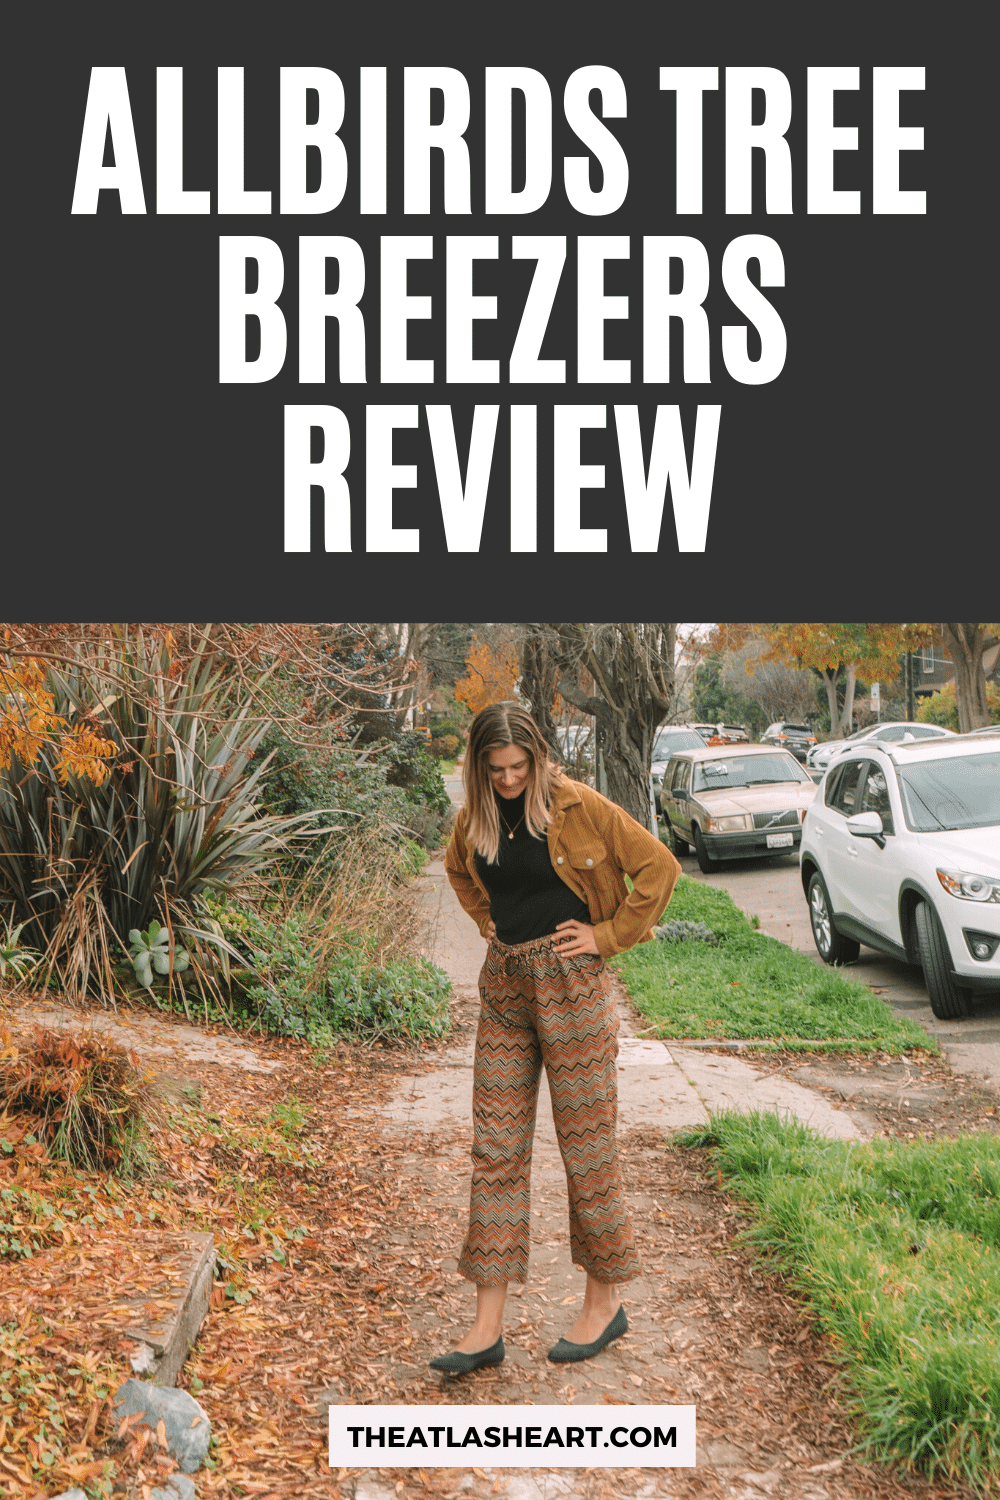 Allbirds Tree Breezers Review: My Thoughts on Allbirds Flats